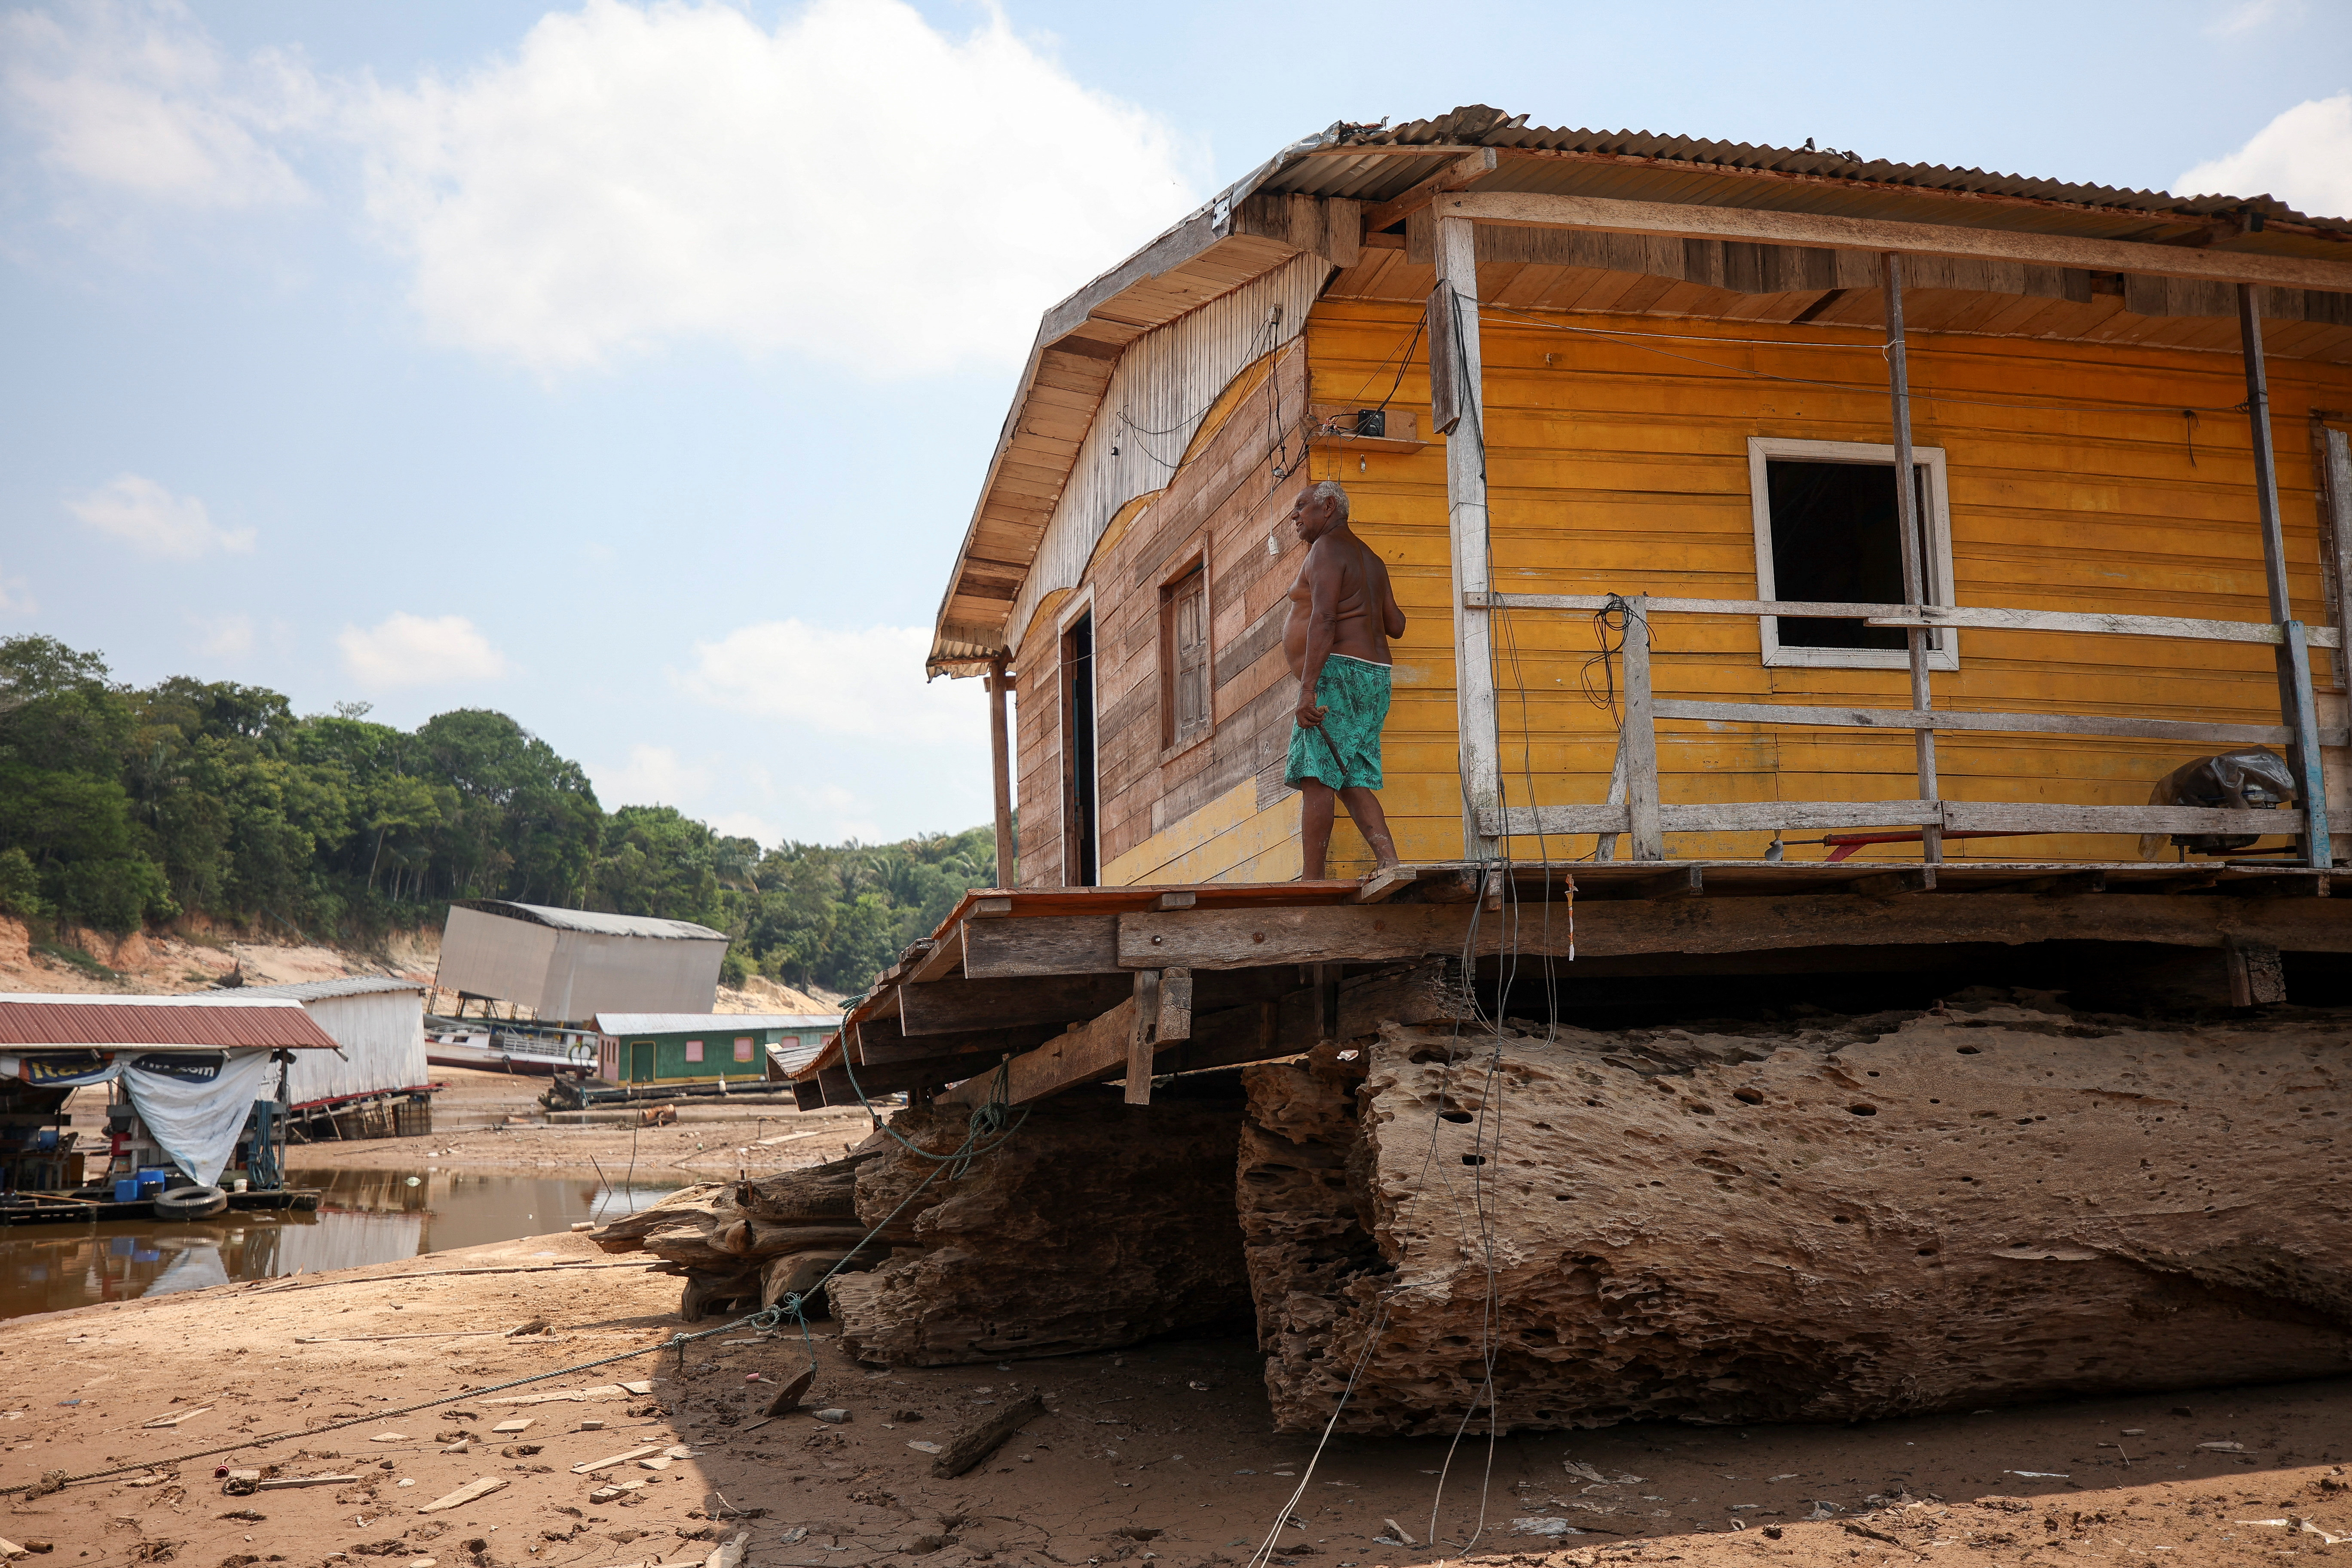 Bernardo da Cunha Reis stands on the porch of his house, which is stranded at David's Marina that has been affected by the drought of the Negro River